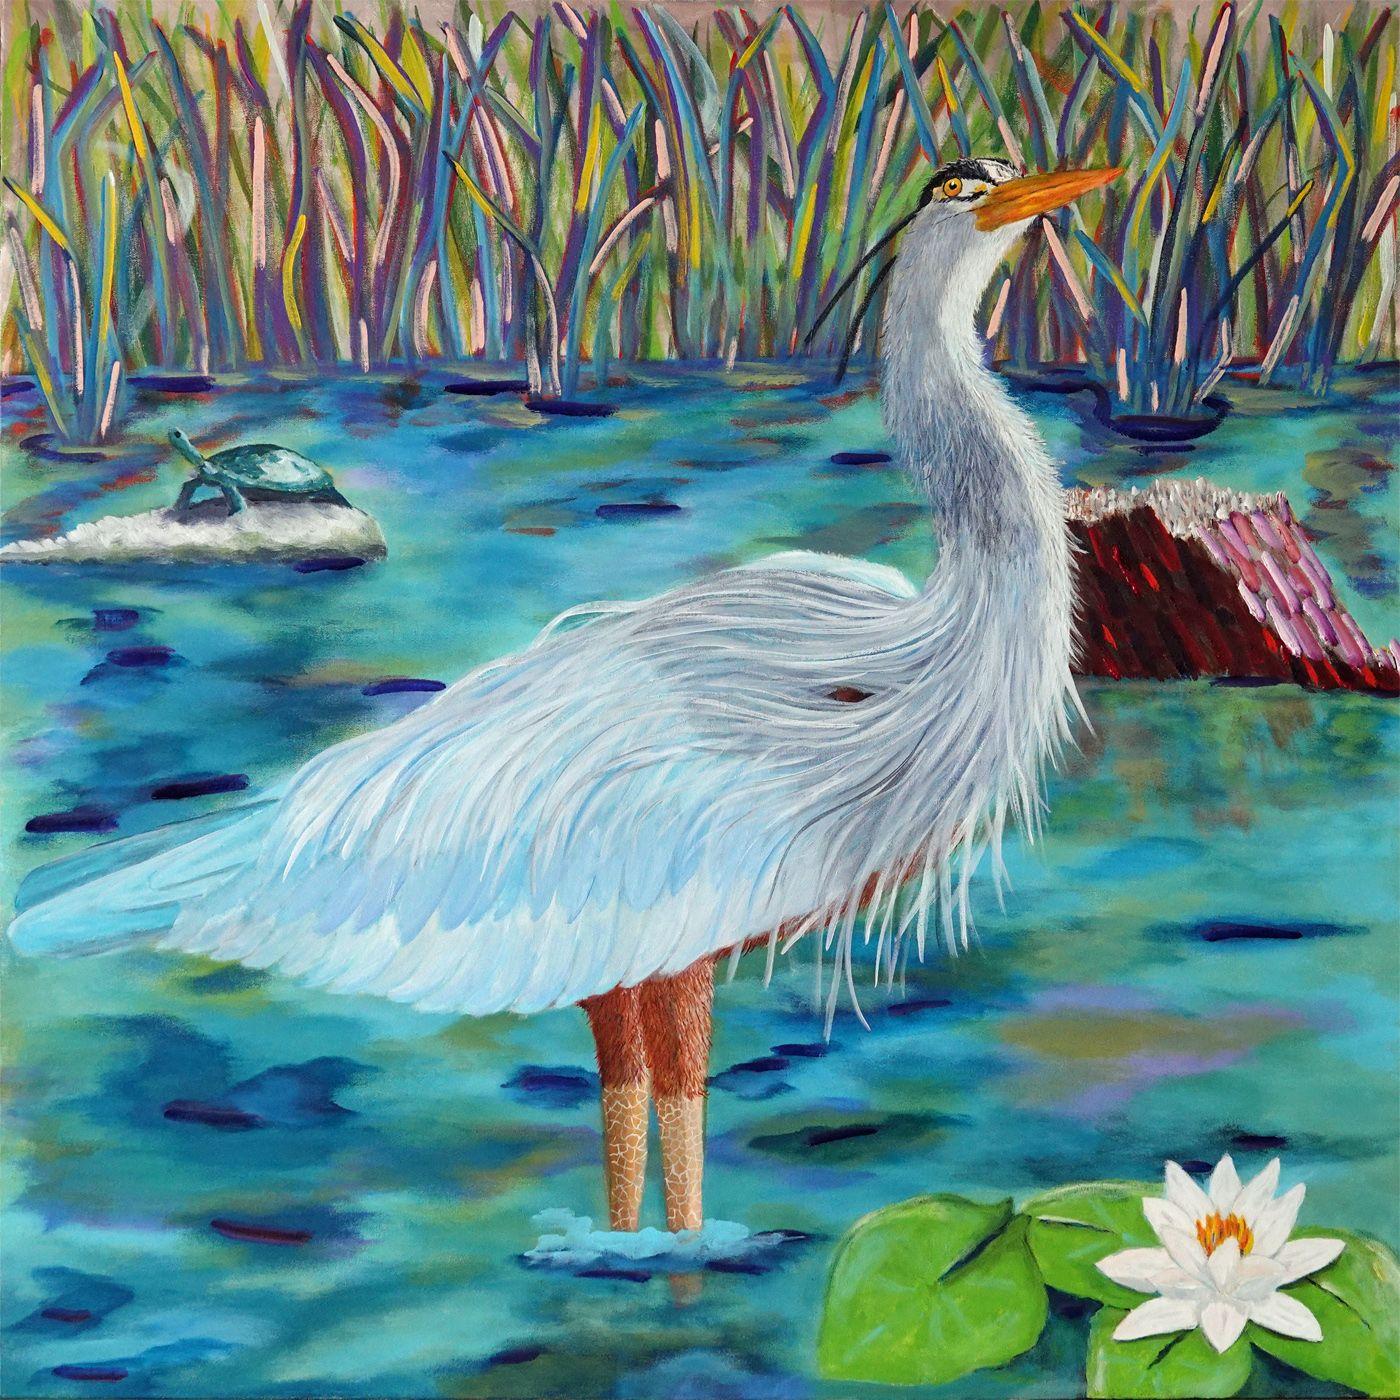 This painting is included in the series "BLUE". I wanted a diagonal line composition for this work to balance the size of the Heron. I included the turtle and the Water Lily.  As always the level of detail is a balance between realism and self